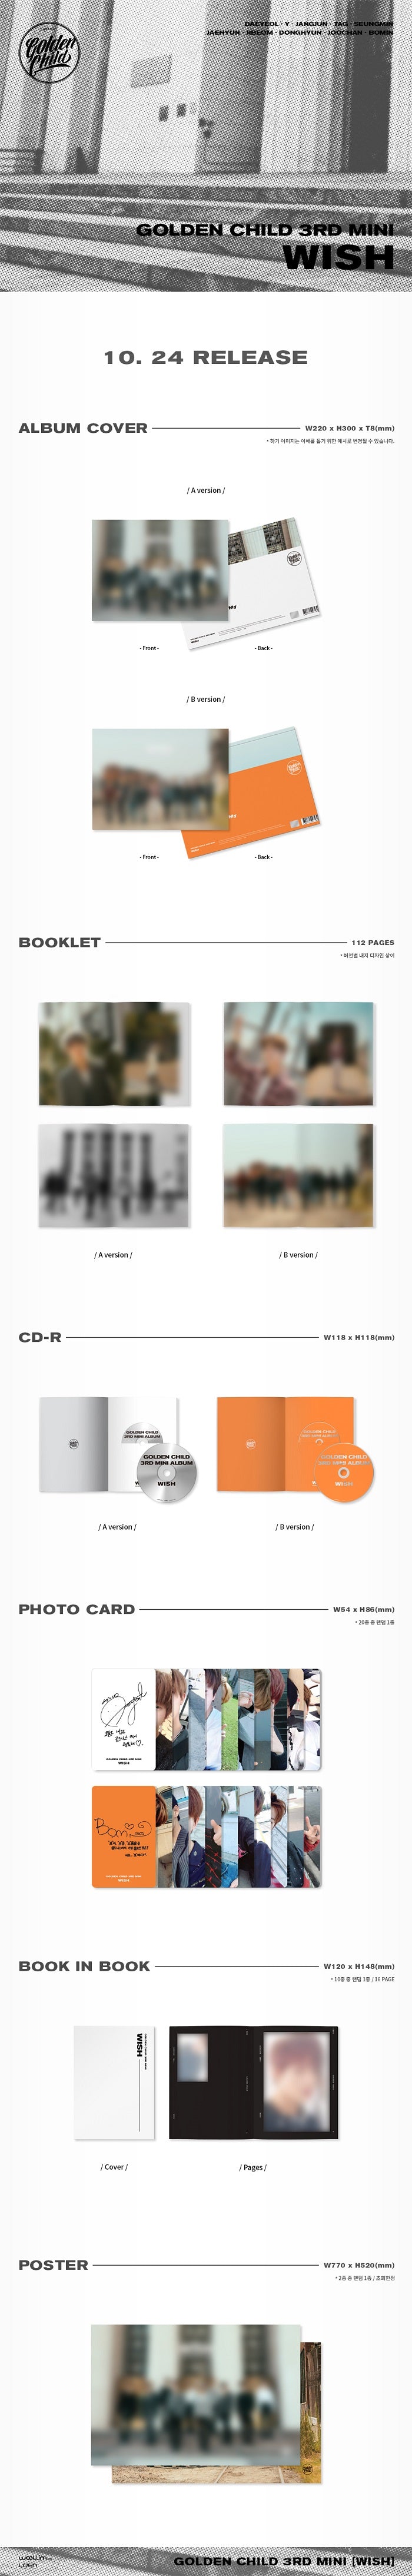 1 CD
1 Booklet (112 pages)
1 Card
1 Book In Book (16 pages)